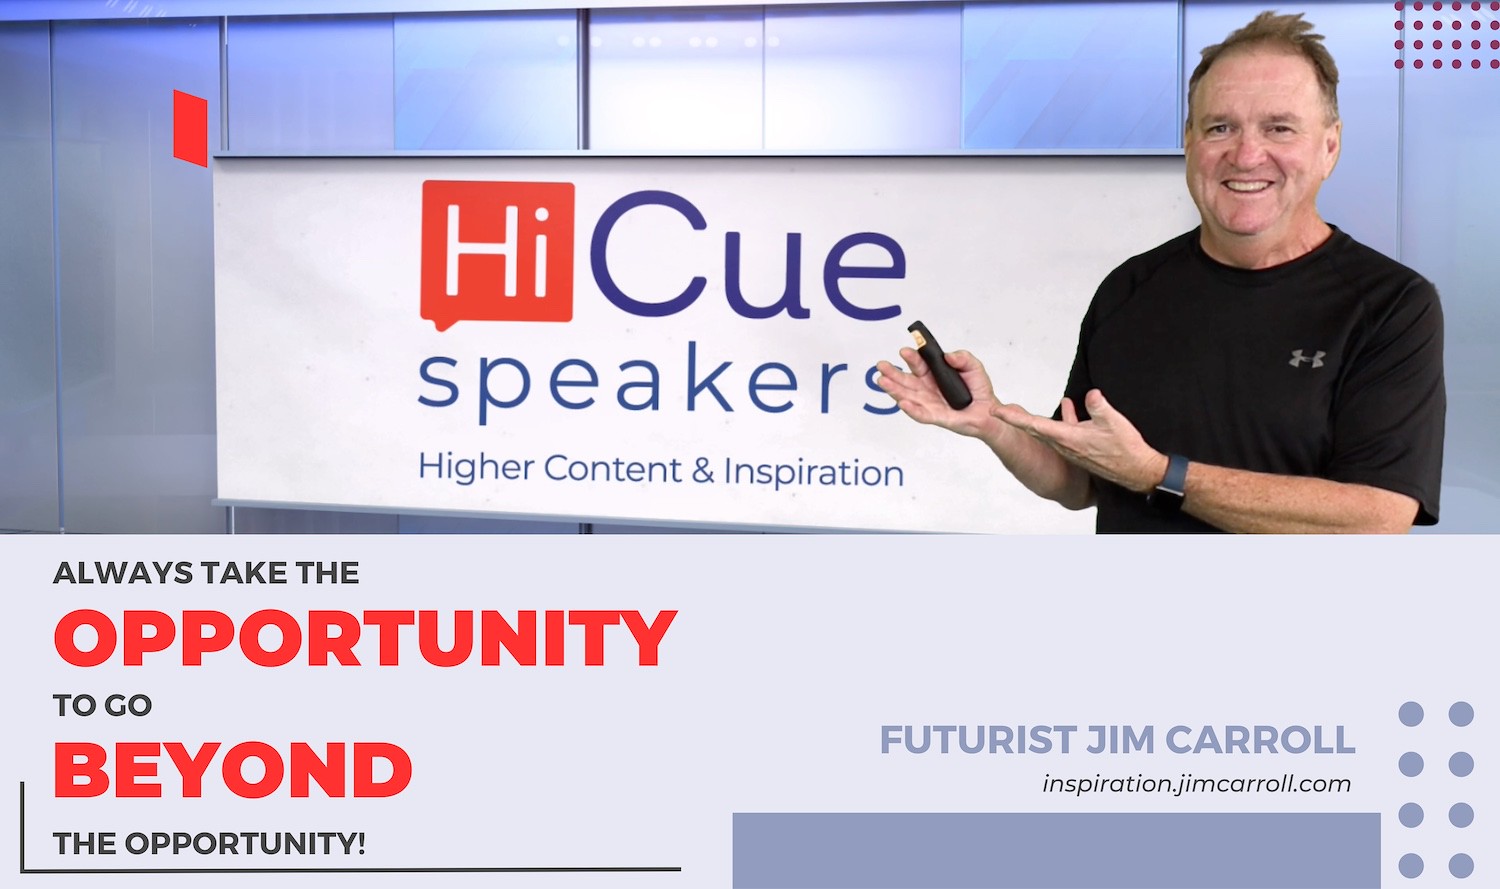 "Always take the opportunity to go beyond the opportunity!" - Futurist Jim Carroll